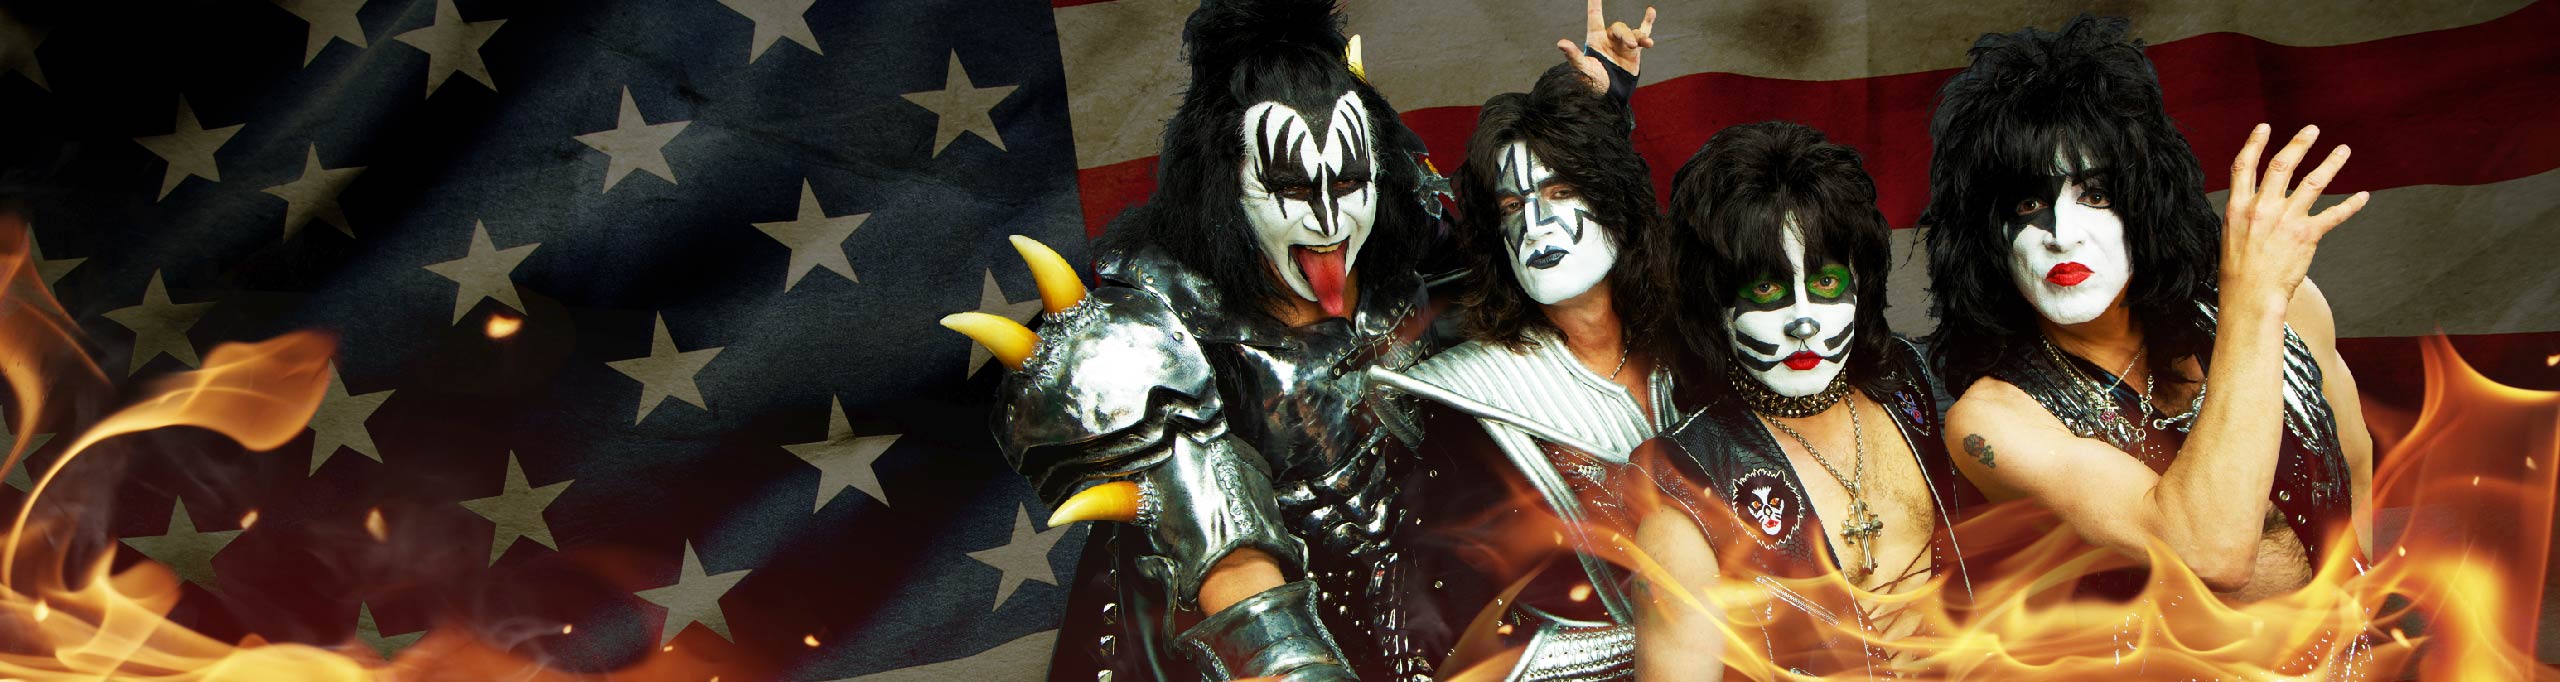 KISS Online :: Welcome To The Official KISS Website